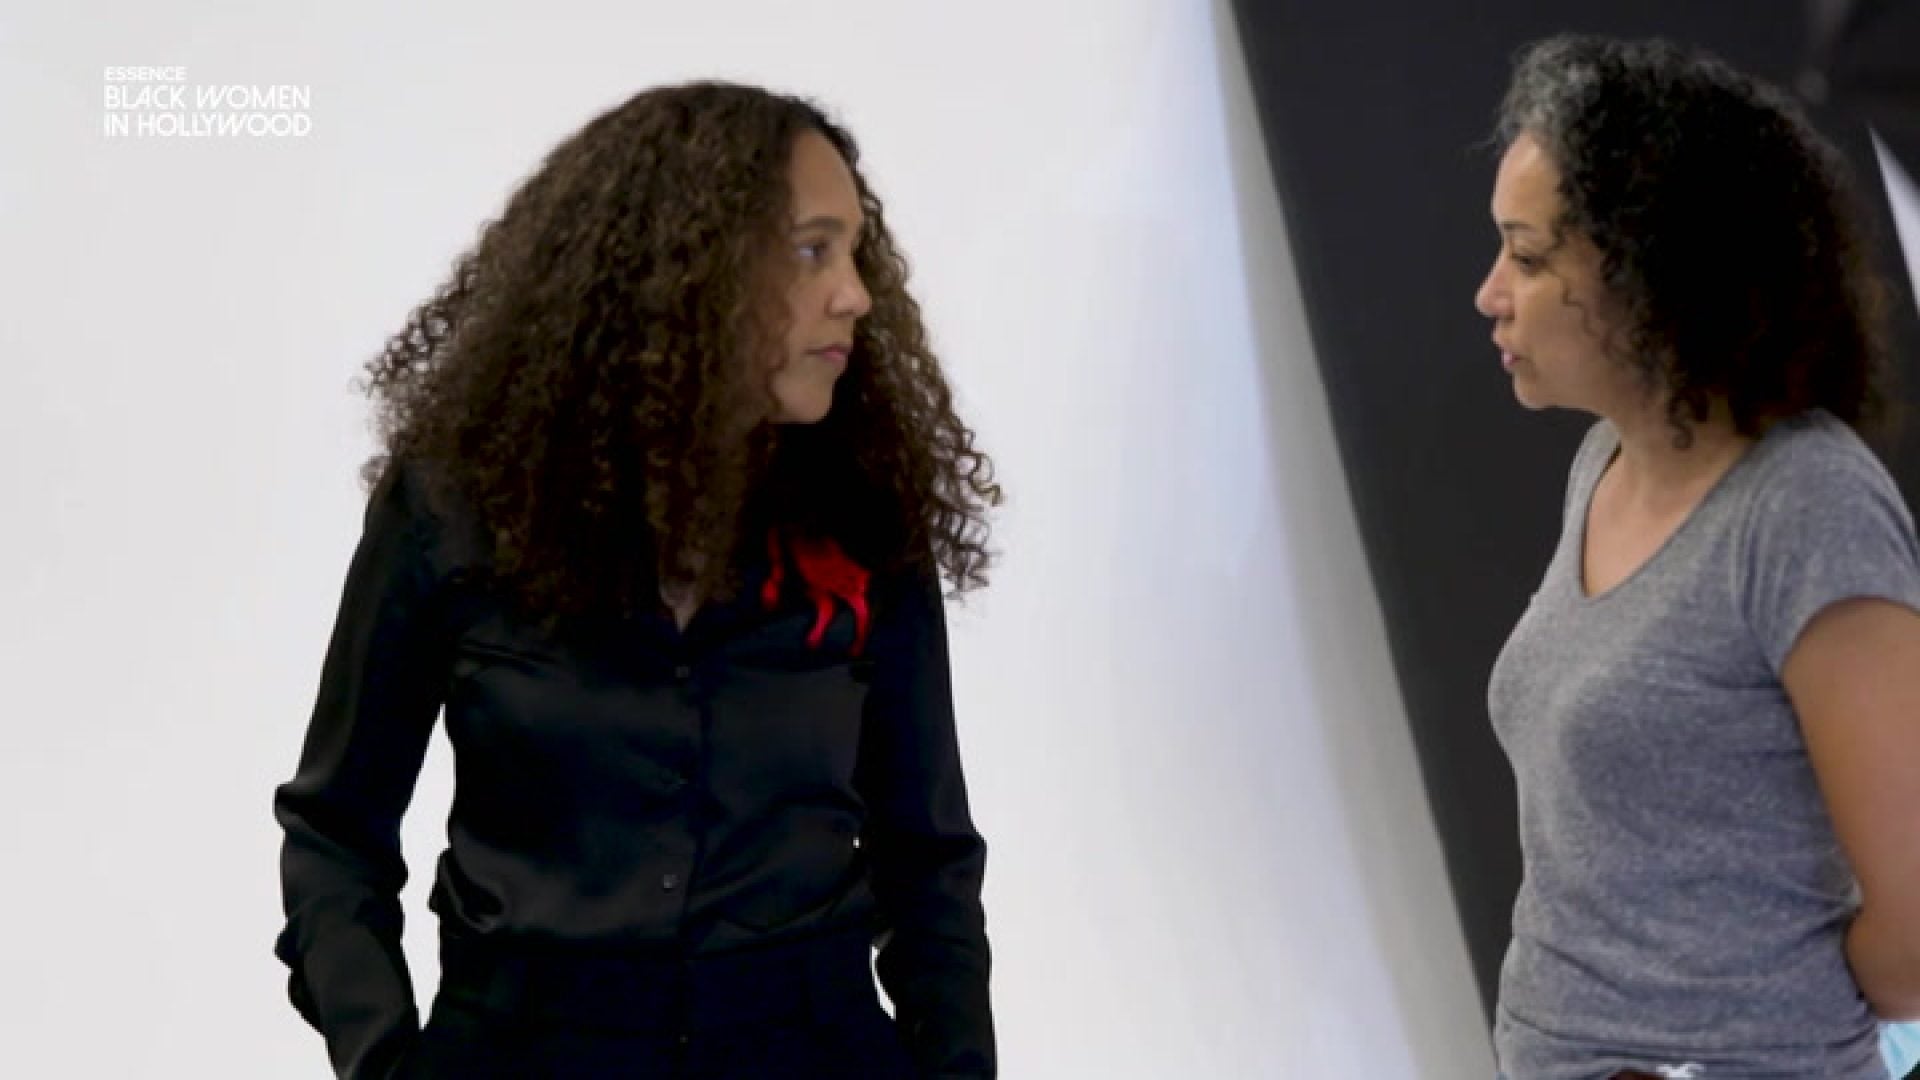 WATCH: Gina Prince-Bythewood On ‘The Woman King’ Being Snubbed During Award Season